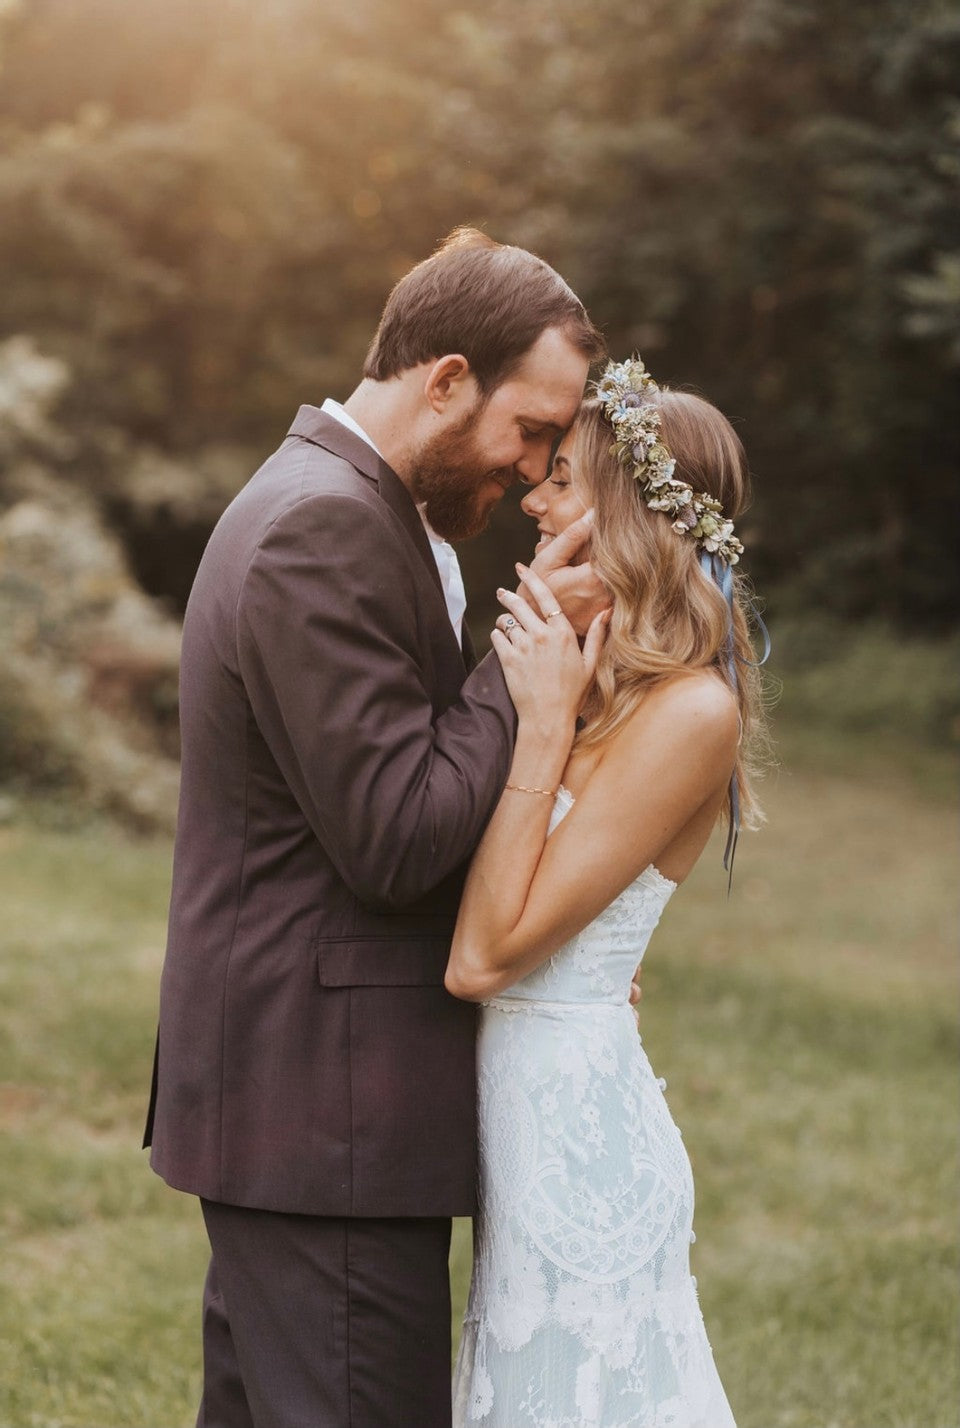 Bride wearing Eloise Lace Wedding Dress with Blue Silk by Claire Pettibone